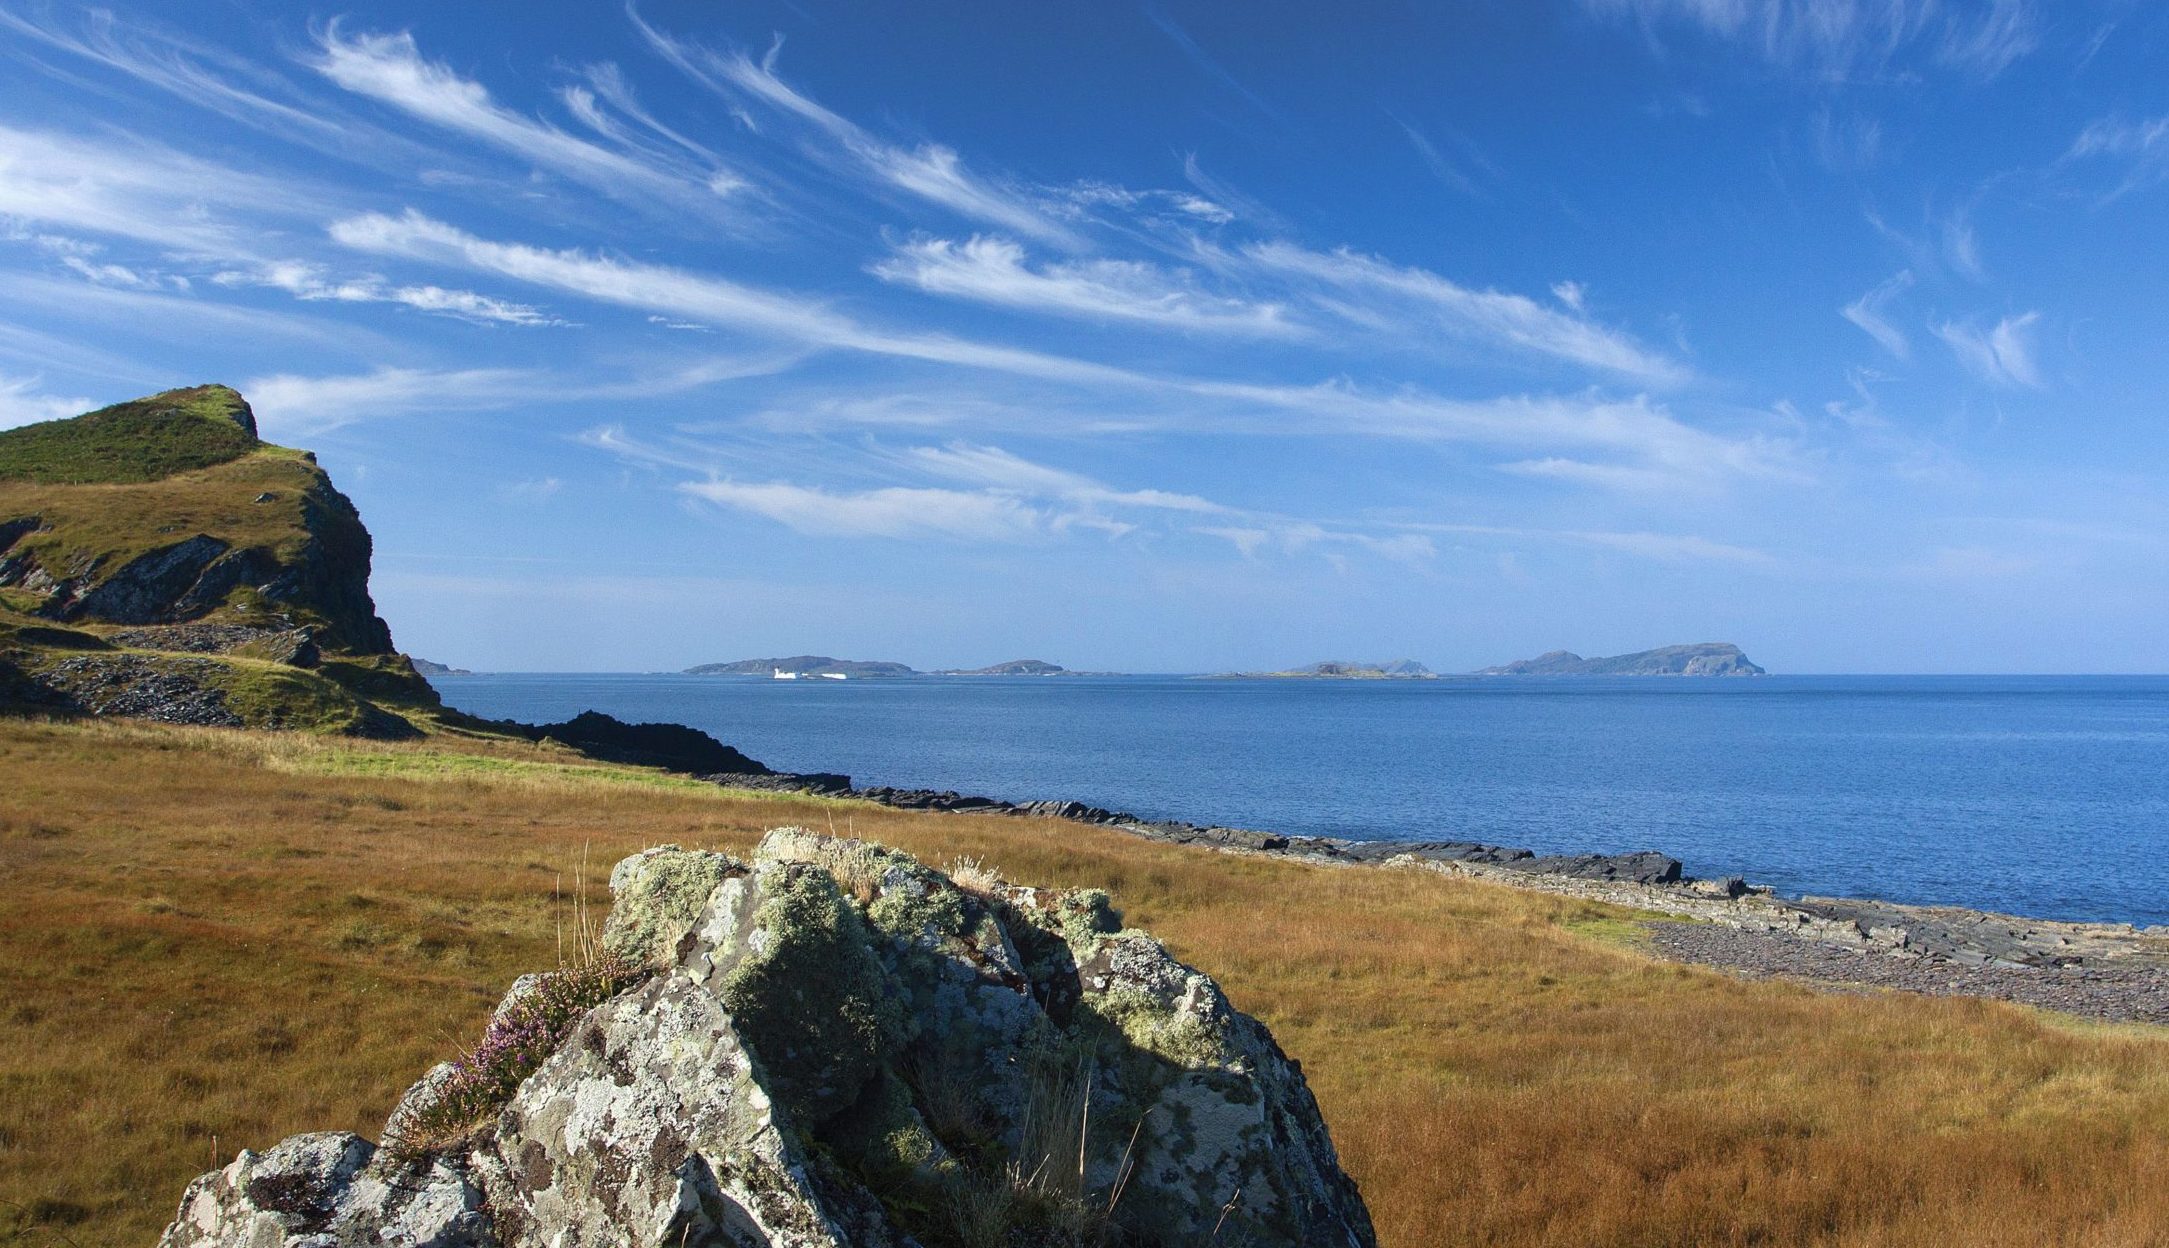 The Garvellachs Islands in the Firth of Lorne from the Isle of Luing